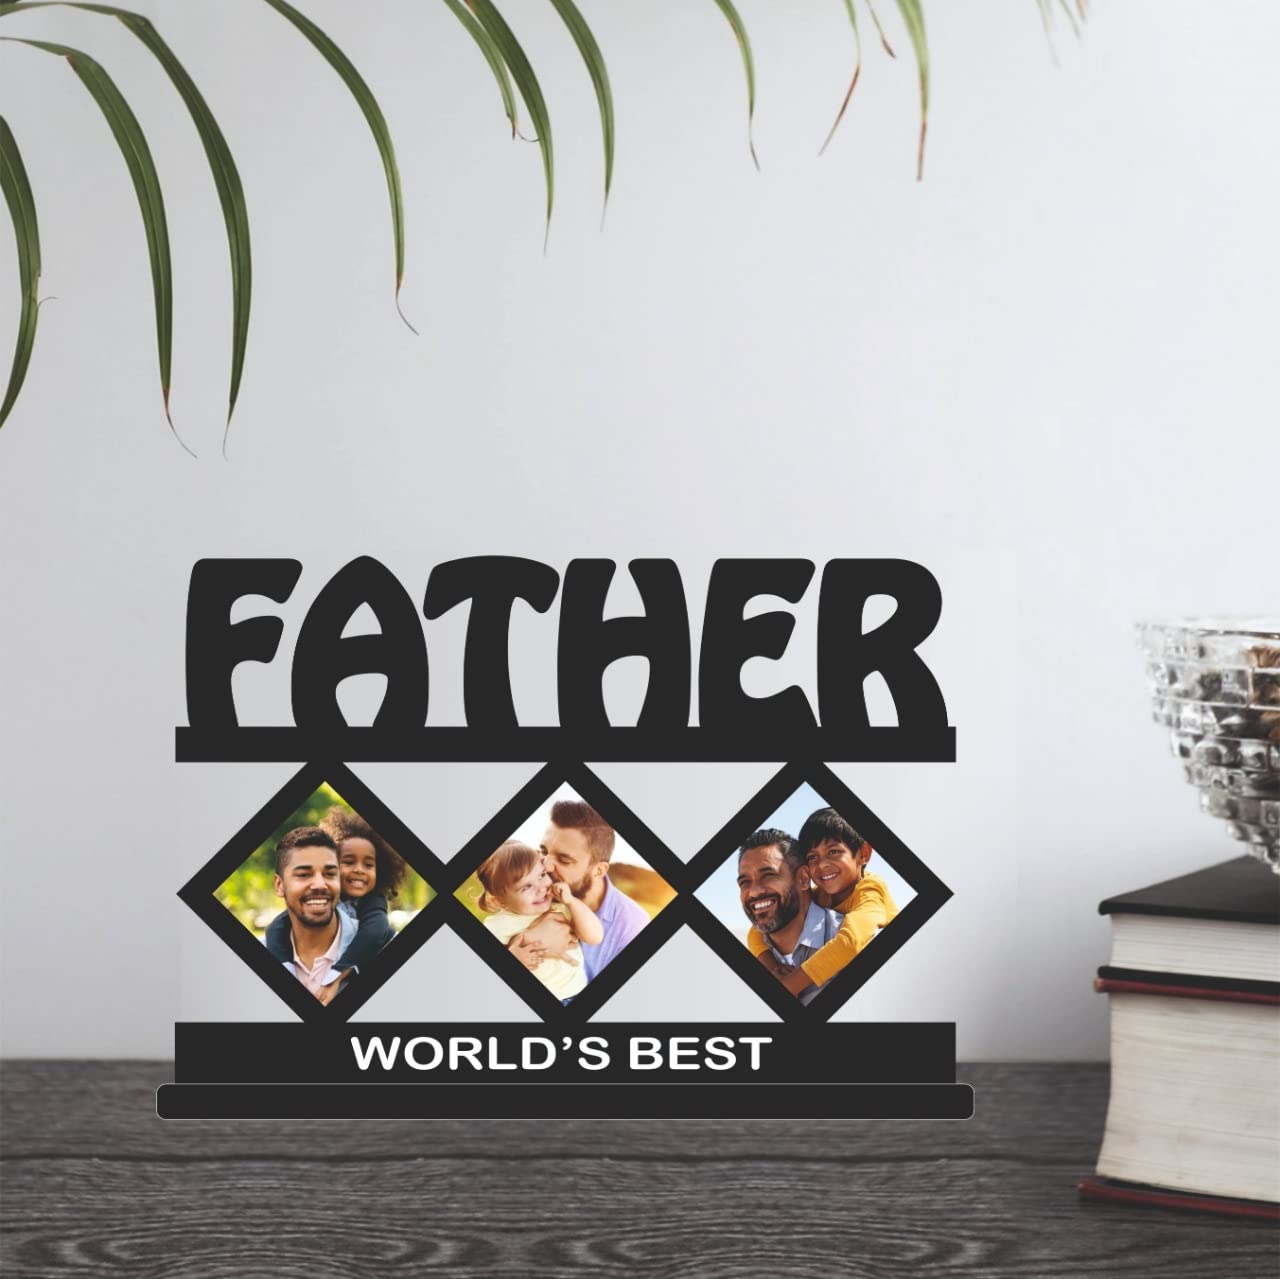 Father Personalized Wooden Table Top